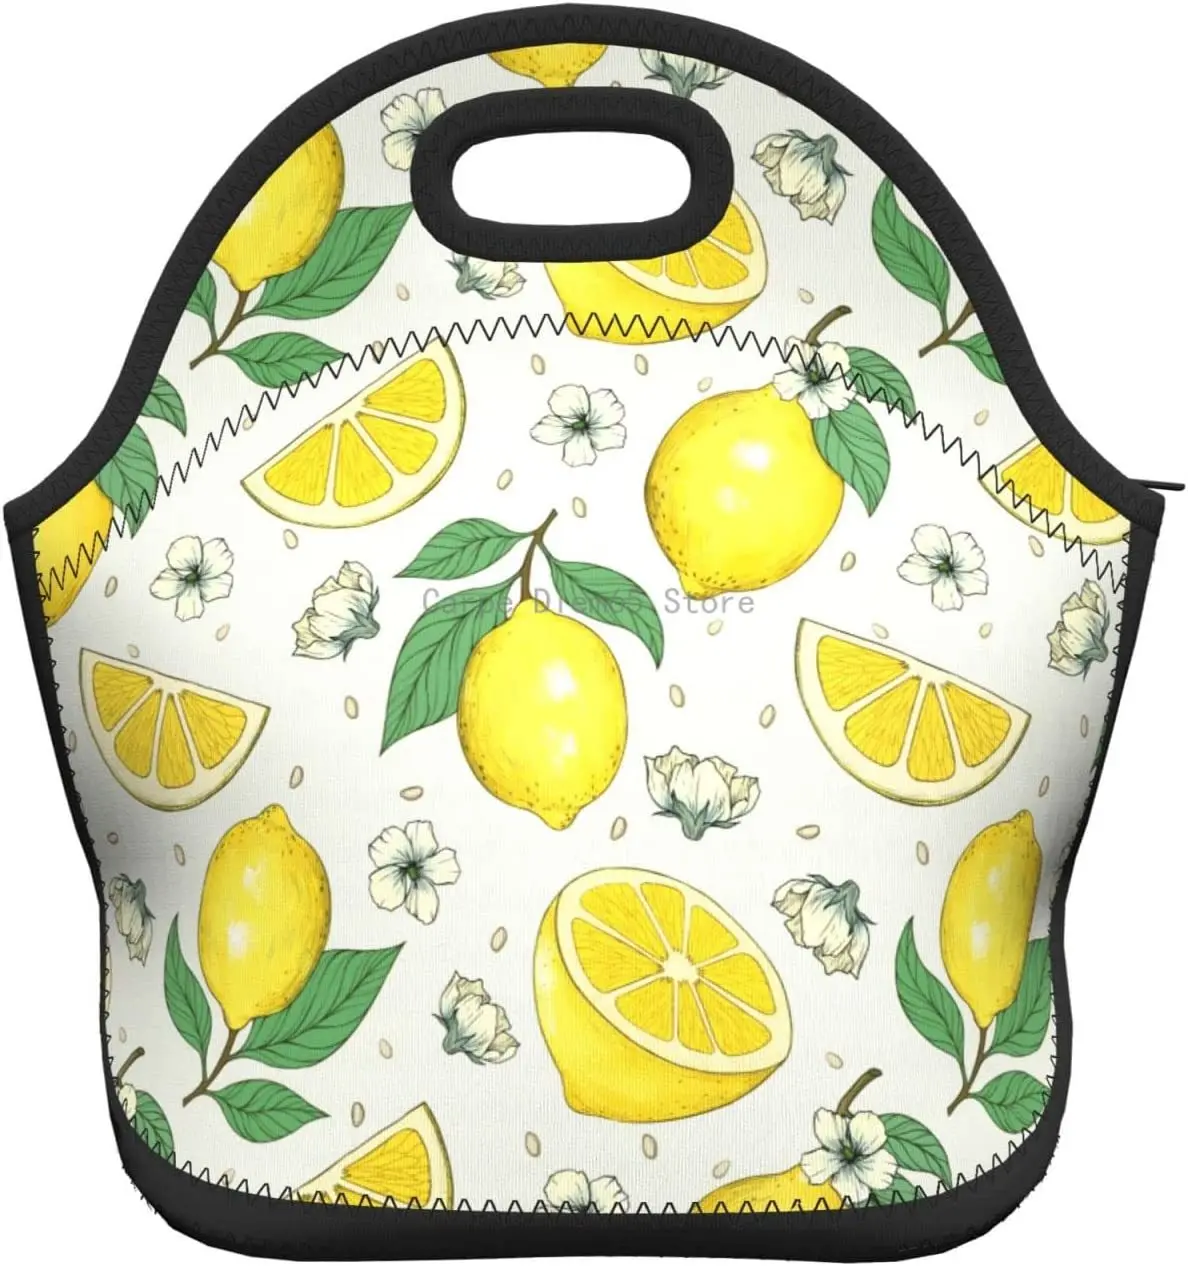 

Lemons Insulated Neoprene Lunch Bag Tote Lunch Bags Portable Lunch Box Cooler Lunch Bag for Picnic/Boating/Fishing/Work